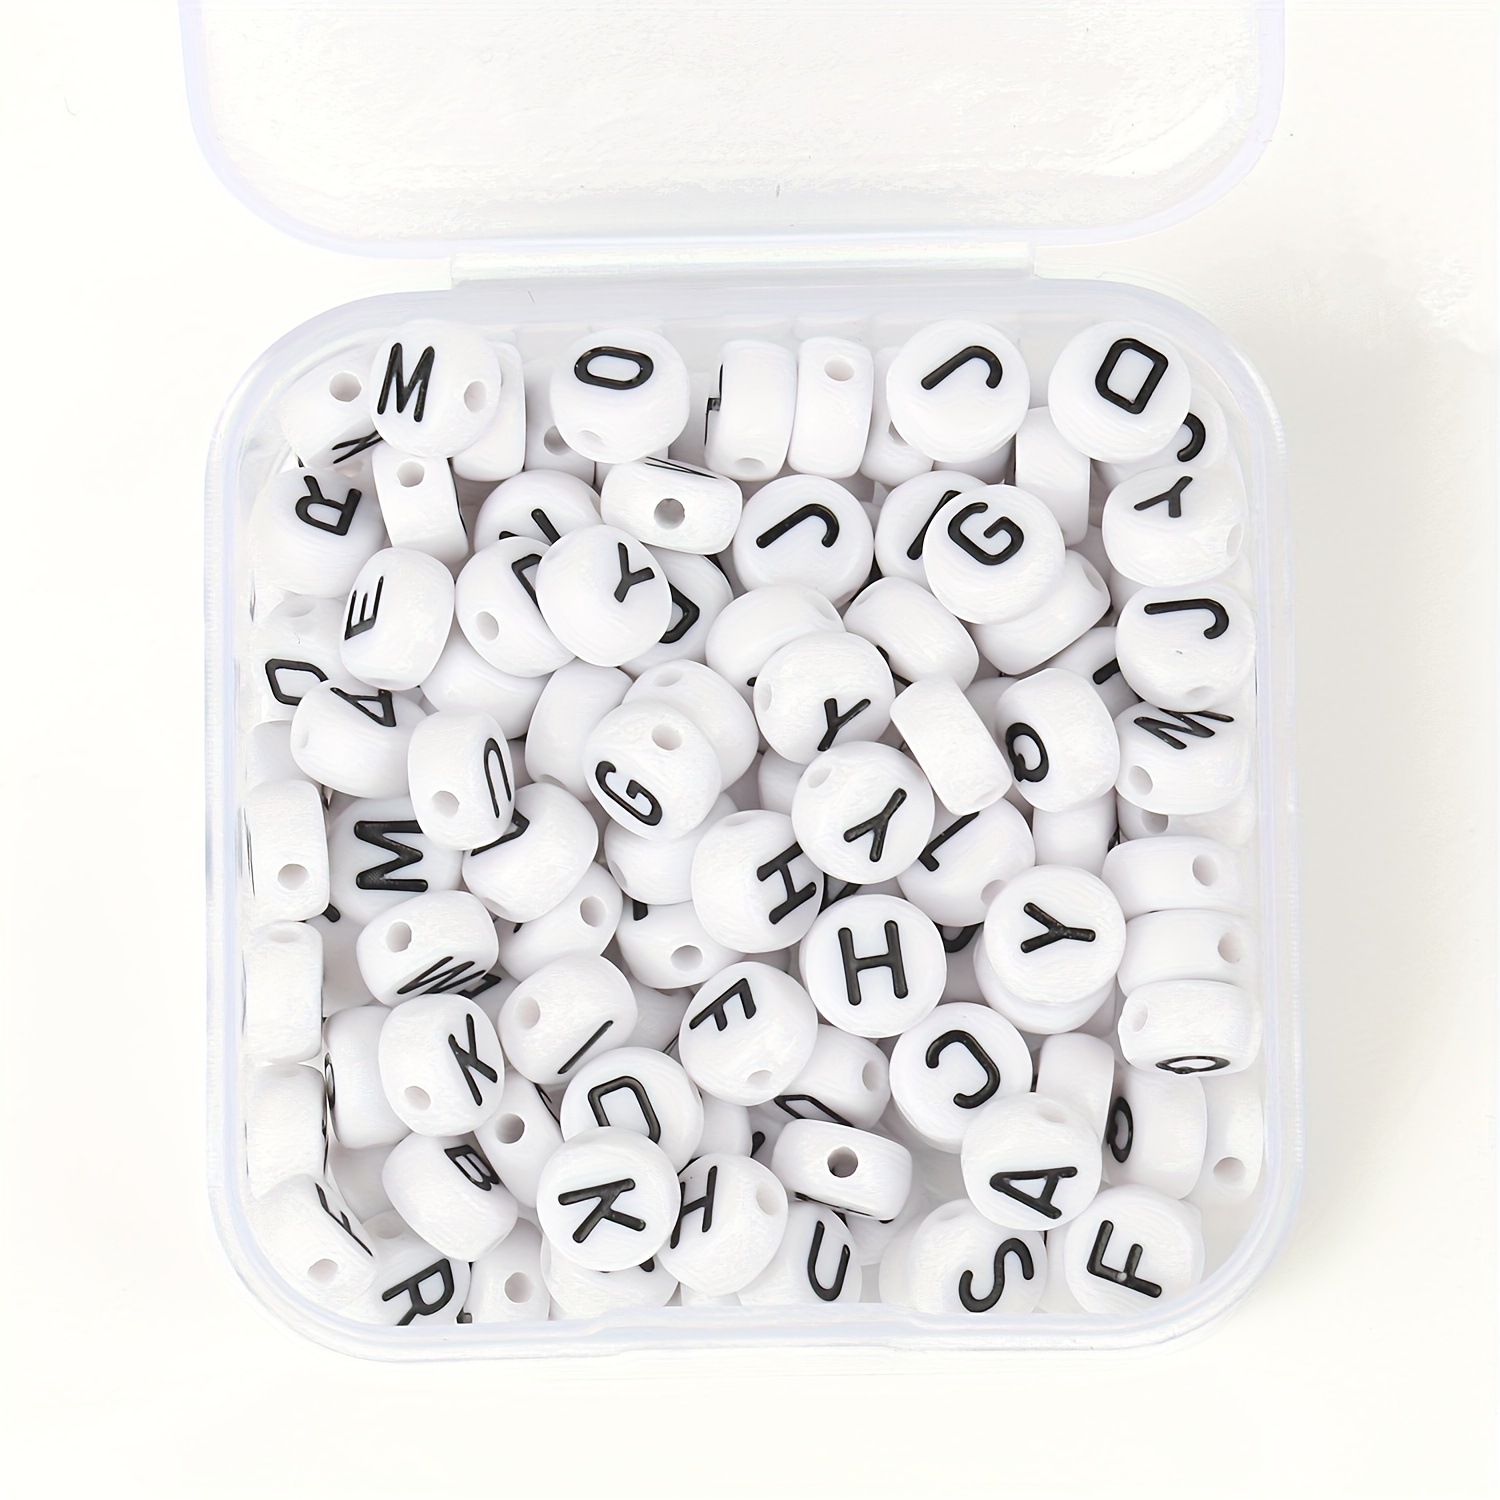 100Pcs Number Beads,White Acrylic Number Beads 7x4mm Plastic Round Number 0  Beads for Jewelry Making Bracelets Necklaces Making